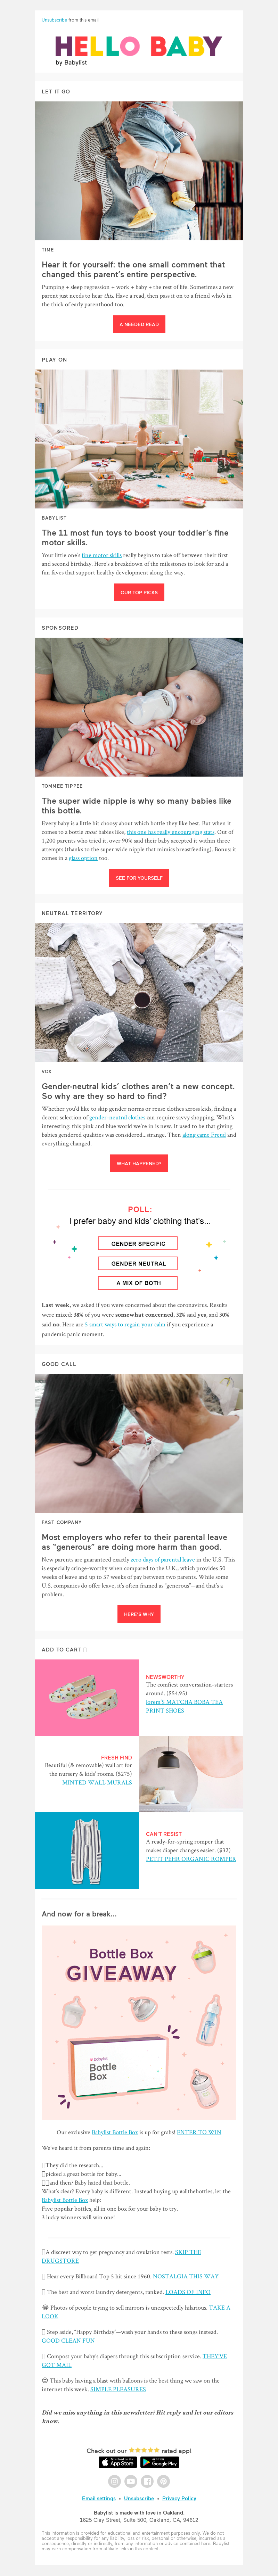 Babylist - Why Your Work’s “Generous” Parental Leave Does More Harm than Good